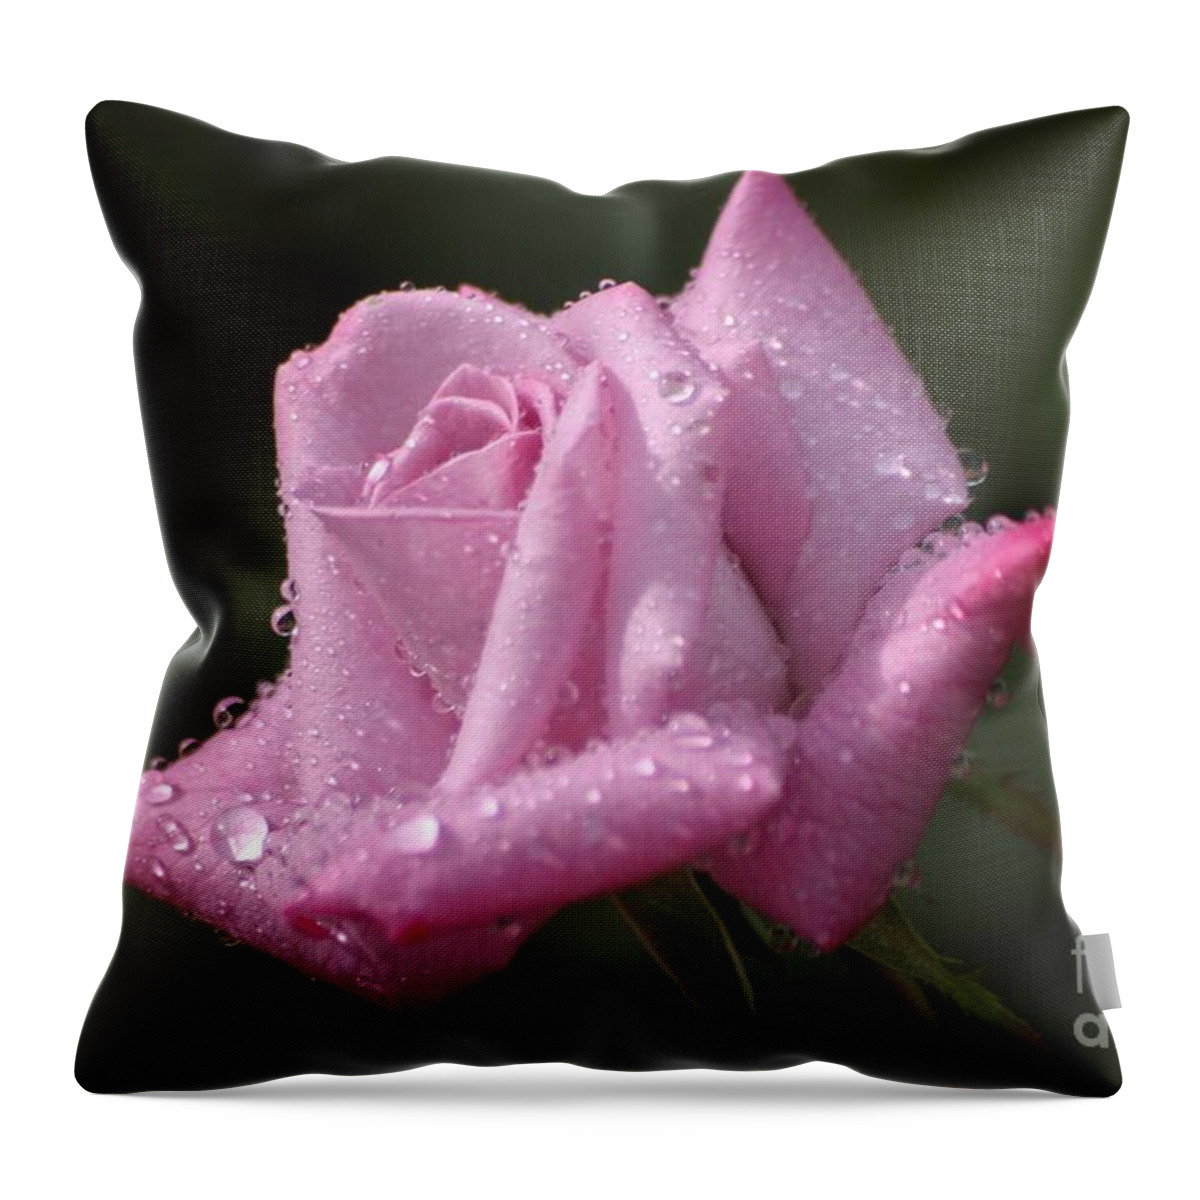 Rose Throw Pillow featuring the photograph Summer Shower by Living Color Photography Lorraine Lynch